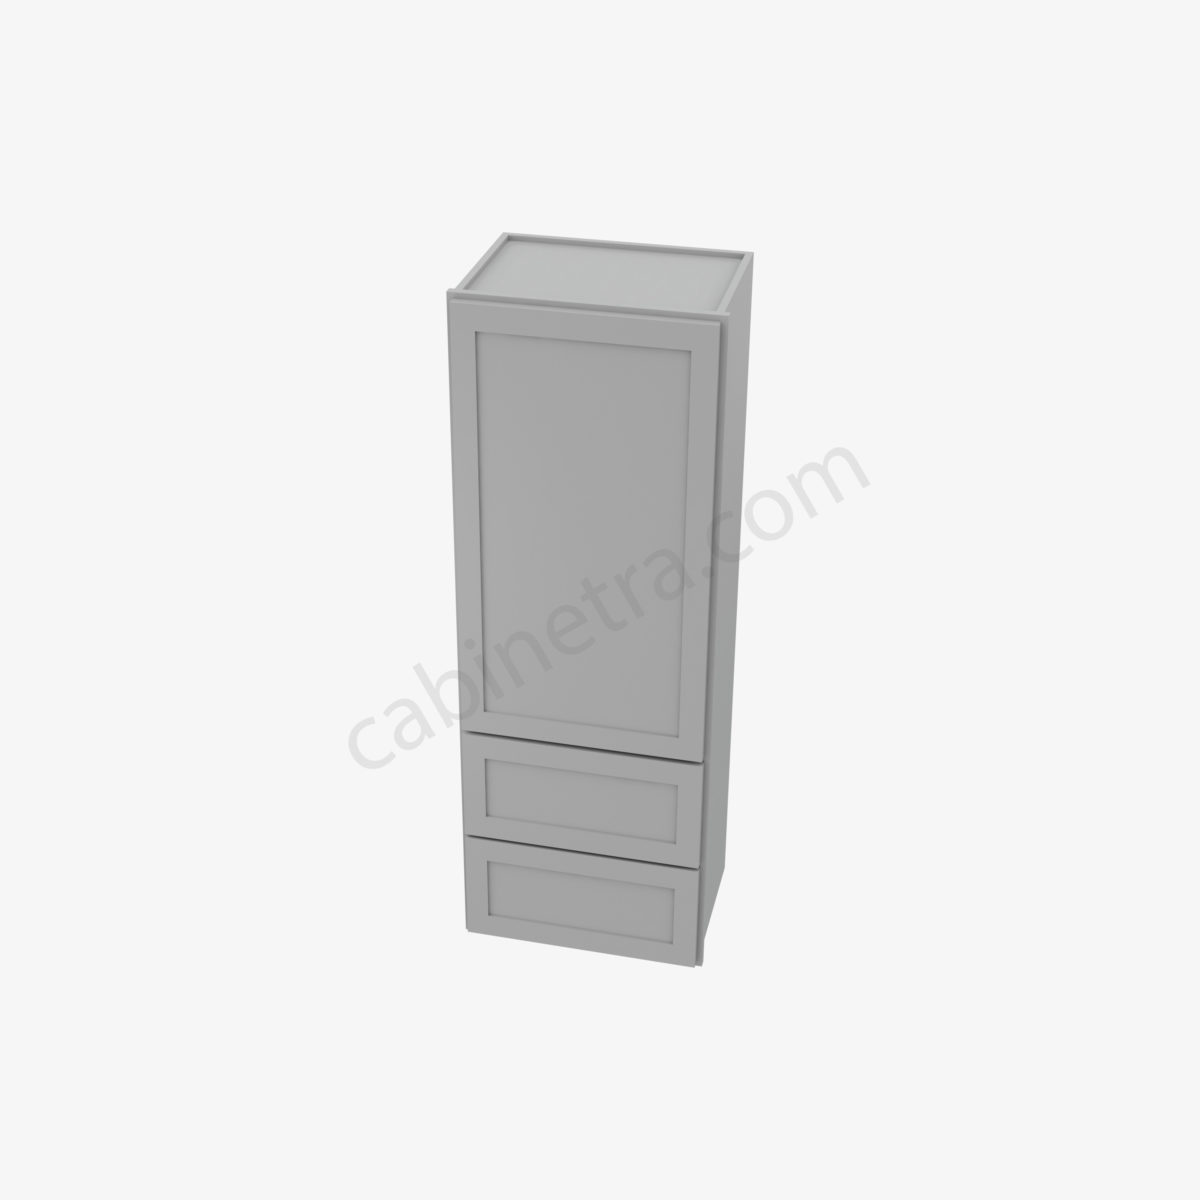 AB W2D1854 3 Forevermark Lait Gray Shaker Cabinetra scaled